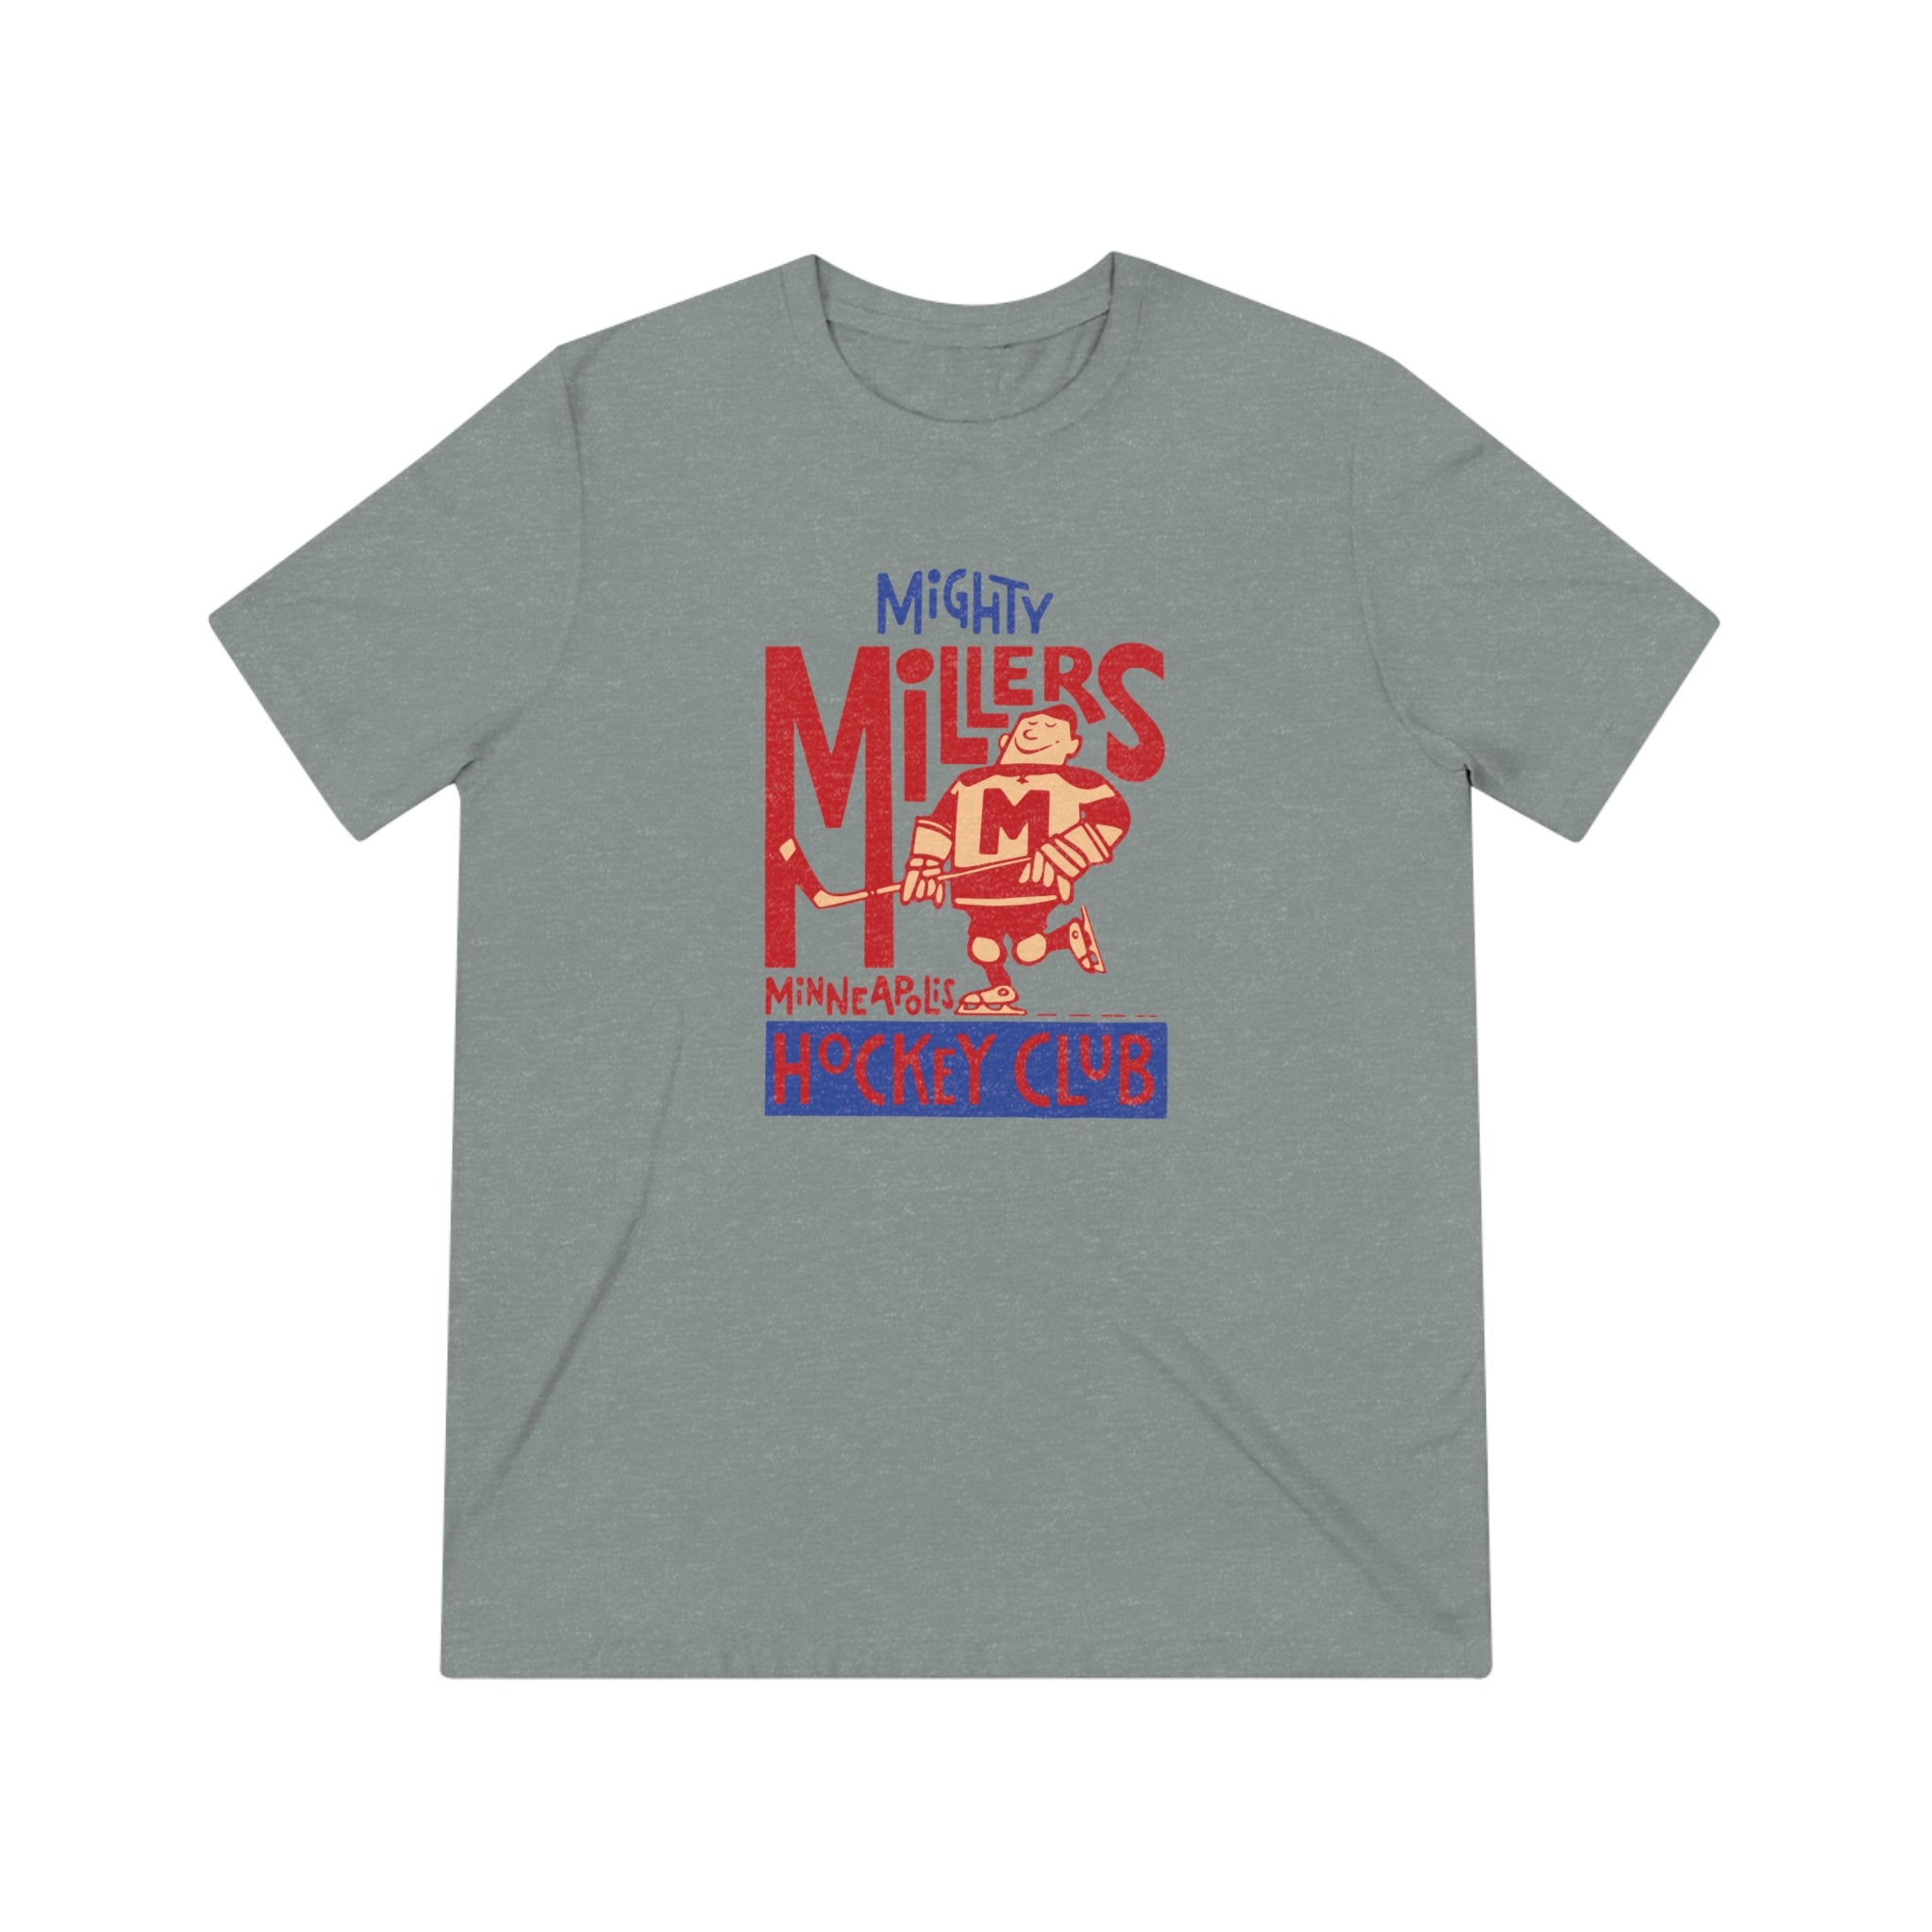 Vintage Ice Hockey Minneapolis Mighty Millers T-Shirt (Tri-Blend Super Light) Athletic Grey Triblend / M